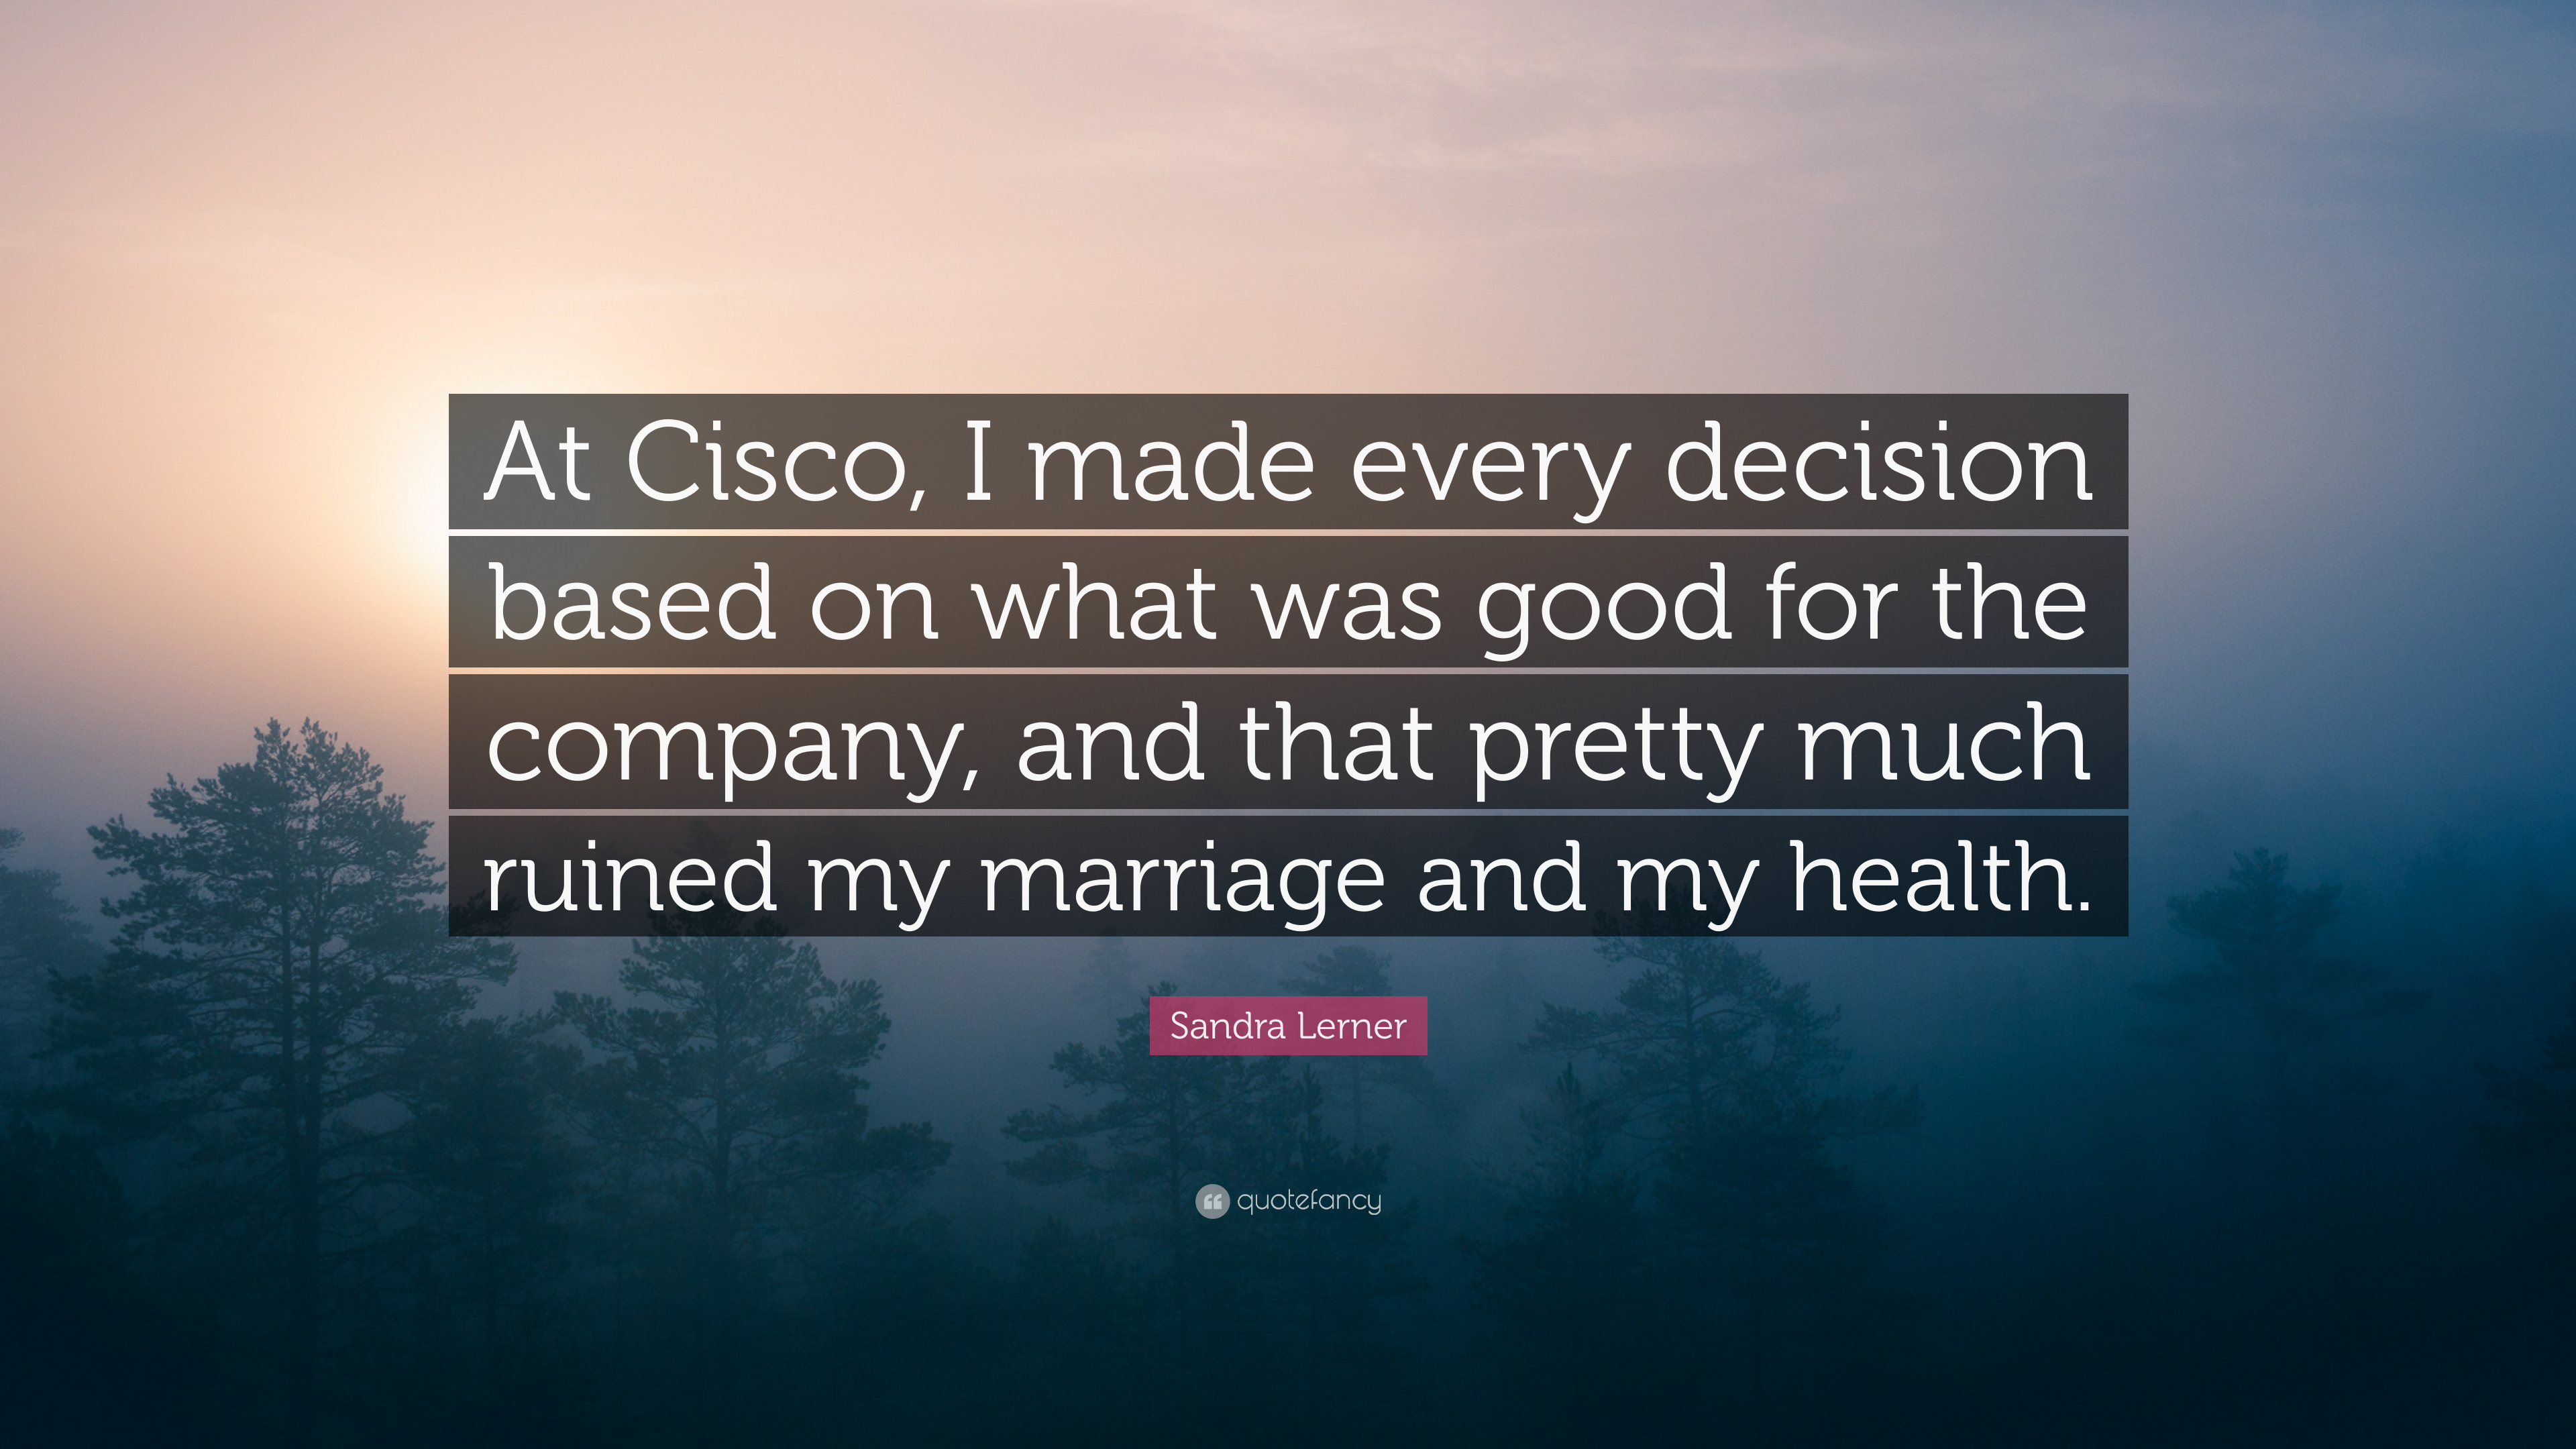 Sandra Lerner Quote: “At Cisco, I made every decision based on what